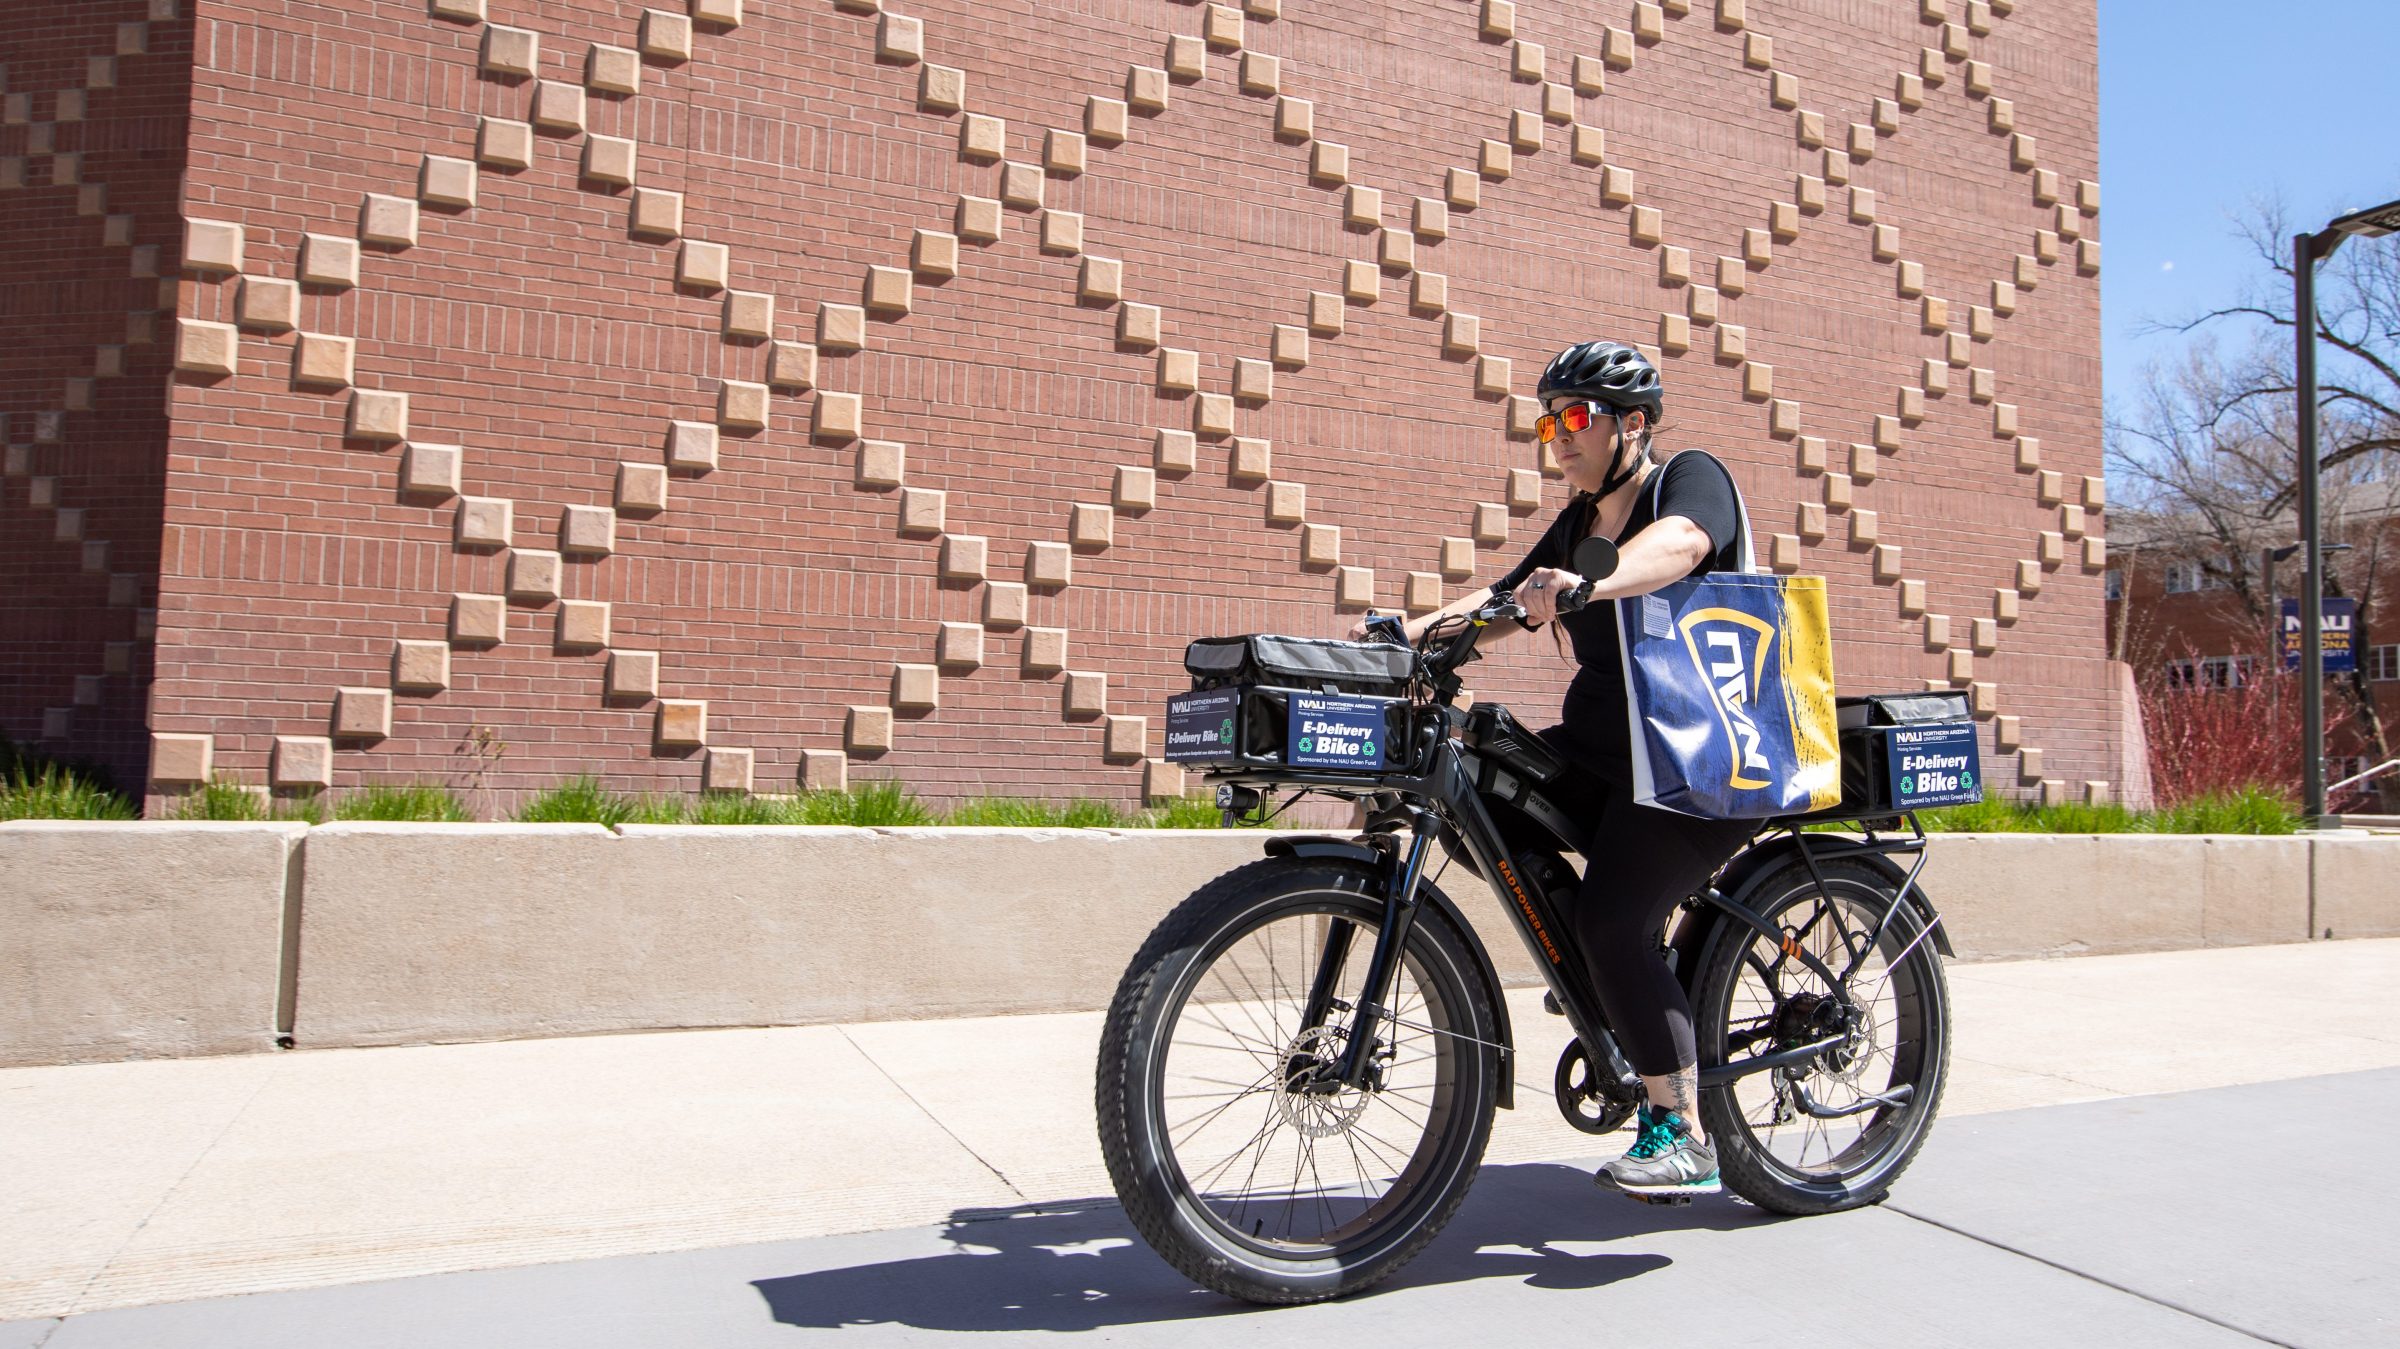 Employee rides the N A U ’s Printing Services’ delivery e-bike carrying a bag with the N A U logo. The bike has storage boxes above the front and back wheels labeled, “e-delivery bike.”